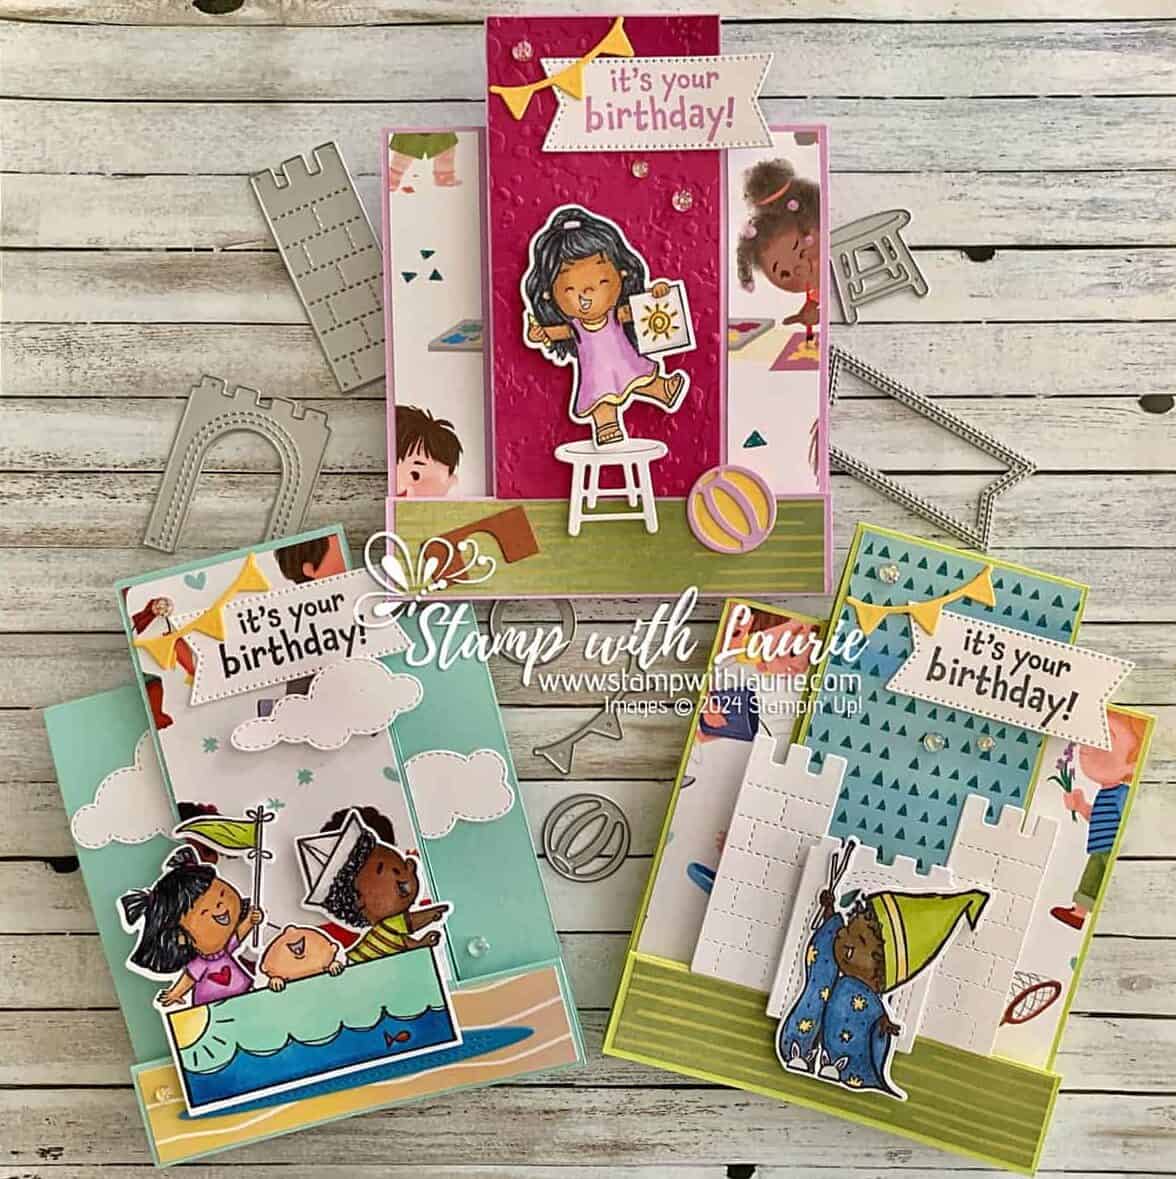 Sending Smiles in All Five Stampin' Up! In Colors 2022! - The Stamp Camp